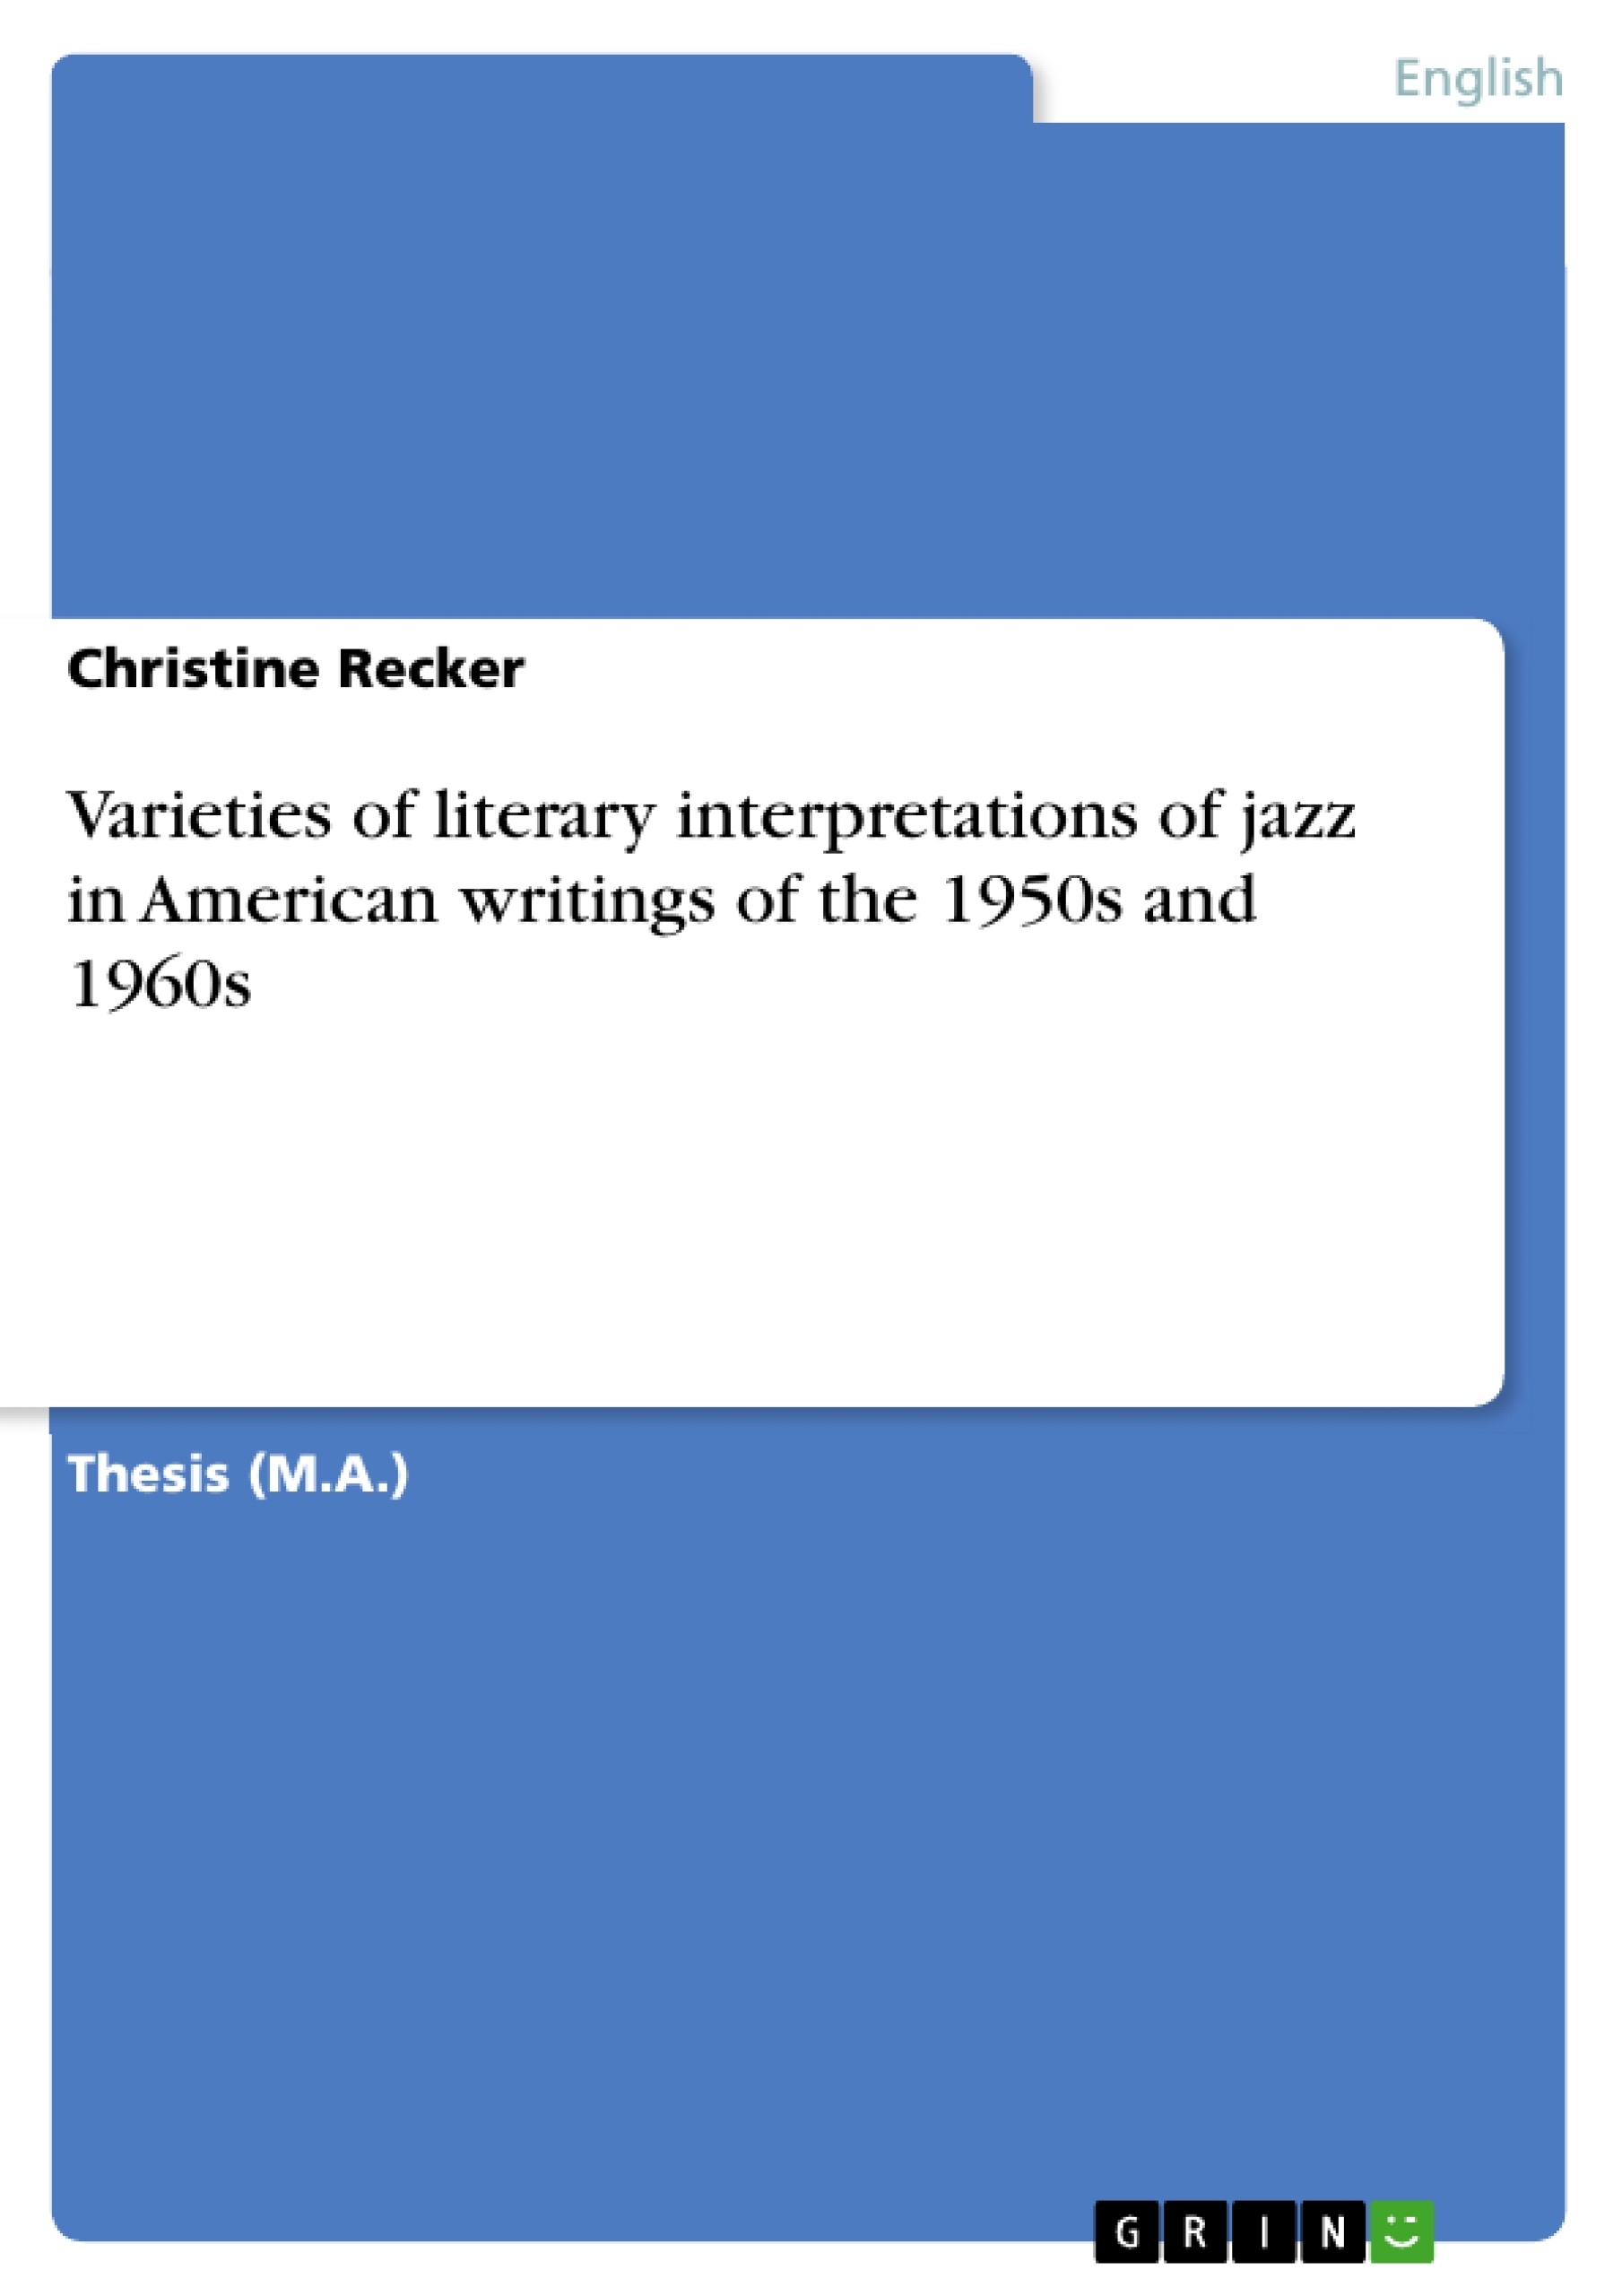 Titre: Varieties of literary interpretations of jazz in American writings of the 1950s and 1960s